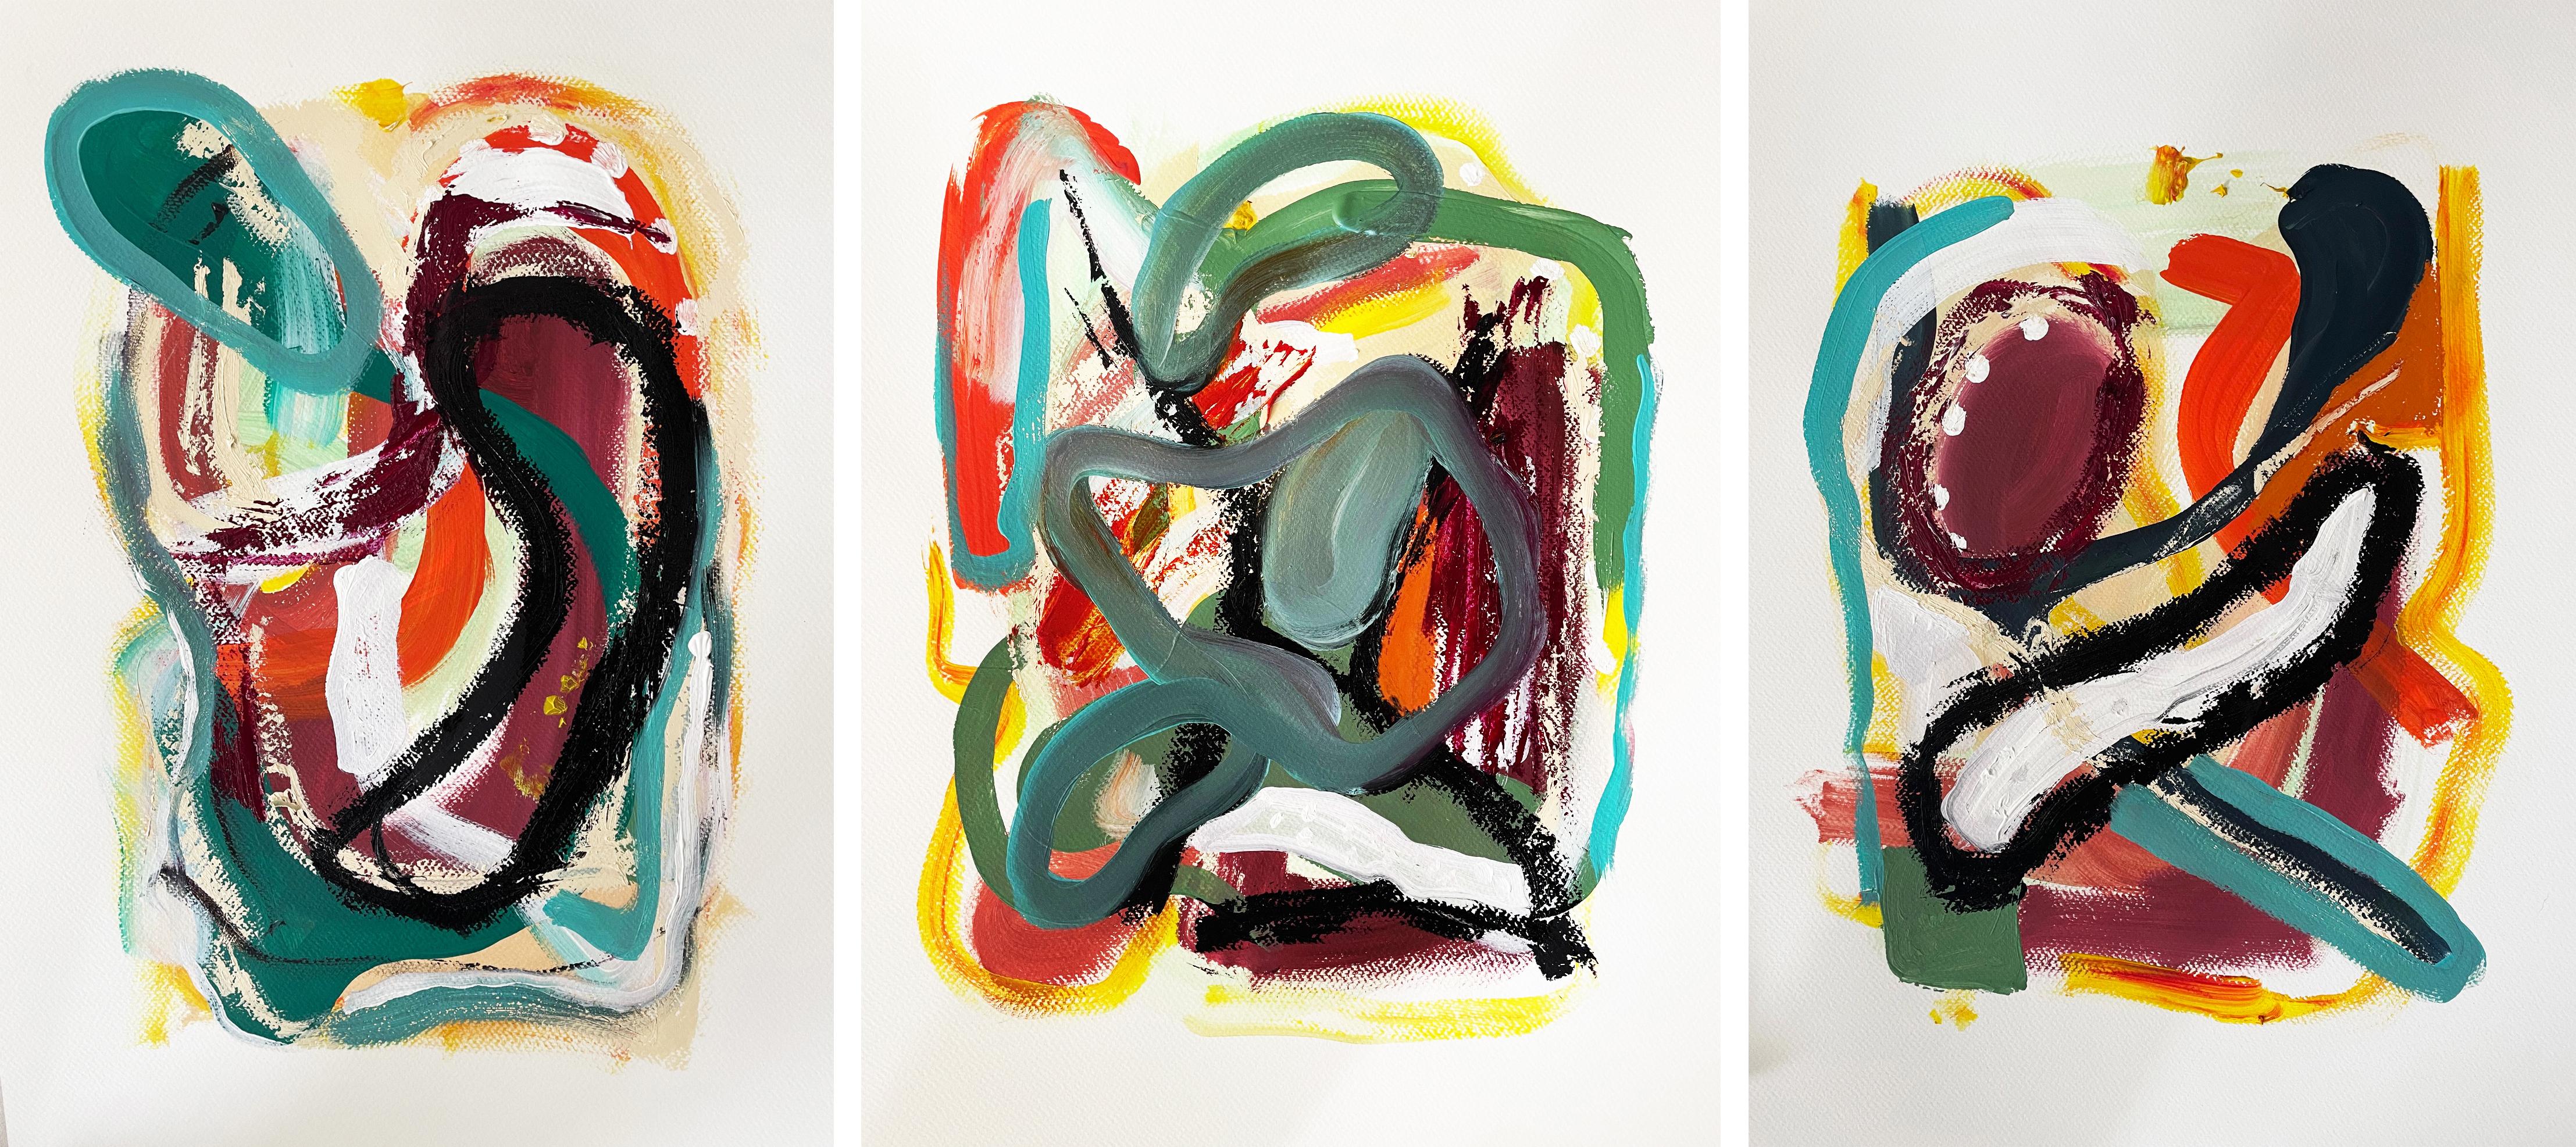 Alec Franco  Abstract Painting - Lab #10, #9 and #8 Paintings. From the Lab series